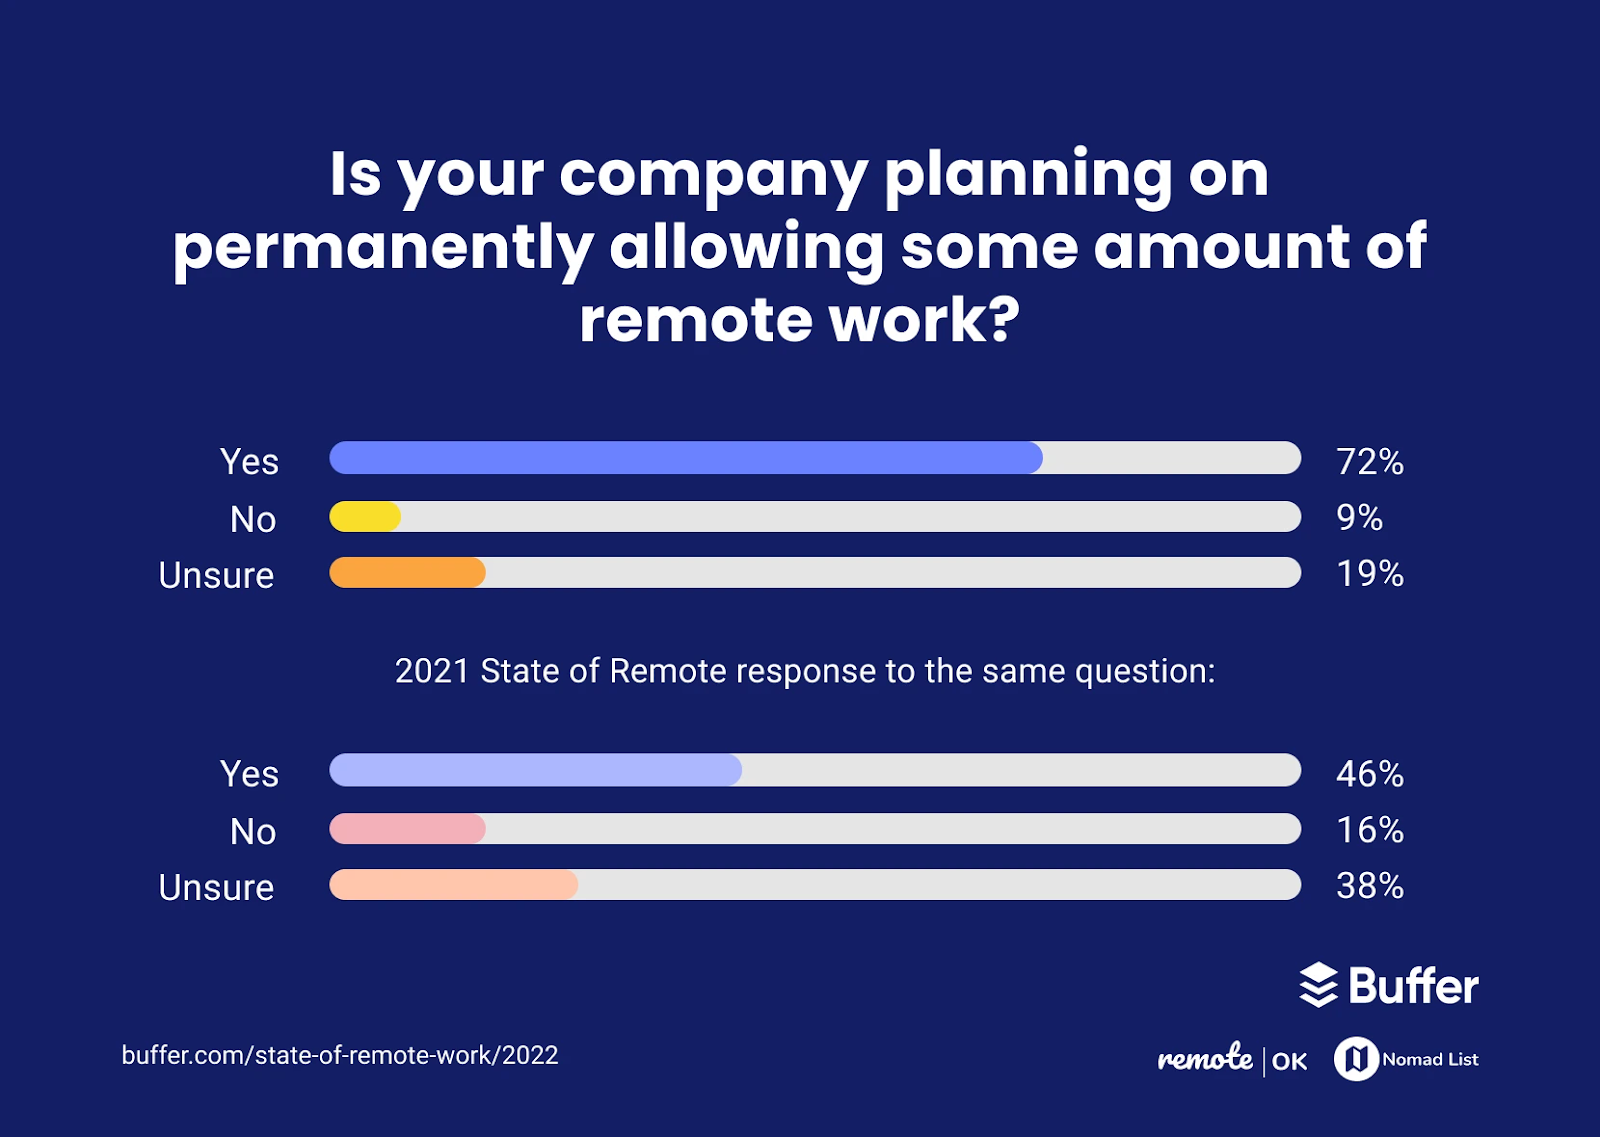 Horizontal bar graph showing companies’ plans to allow some form of remote work permanently. In 2022, 72% responded they would, 9% responded they wouldn’t and 19% said they were unsure. In 2021, 46% said they would, 16% said they wouldn’t and 38% said they were unsure